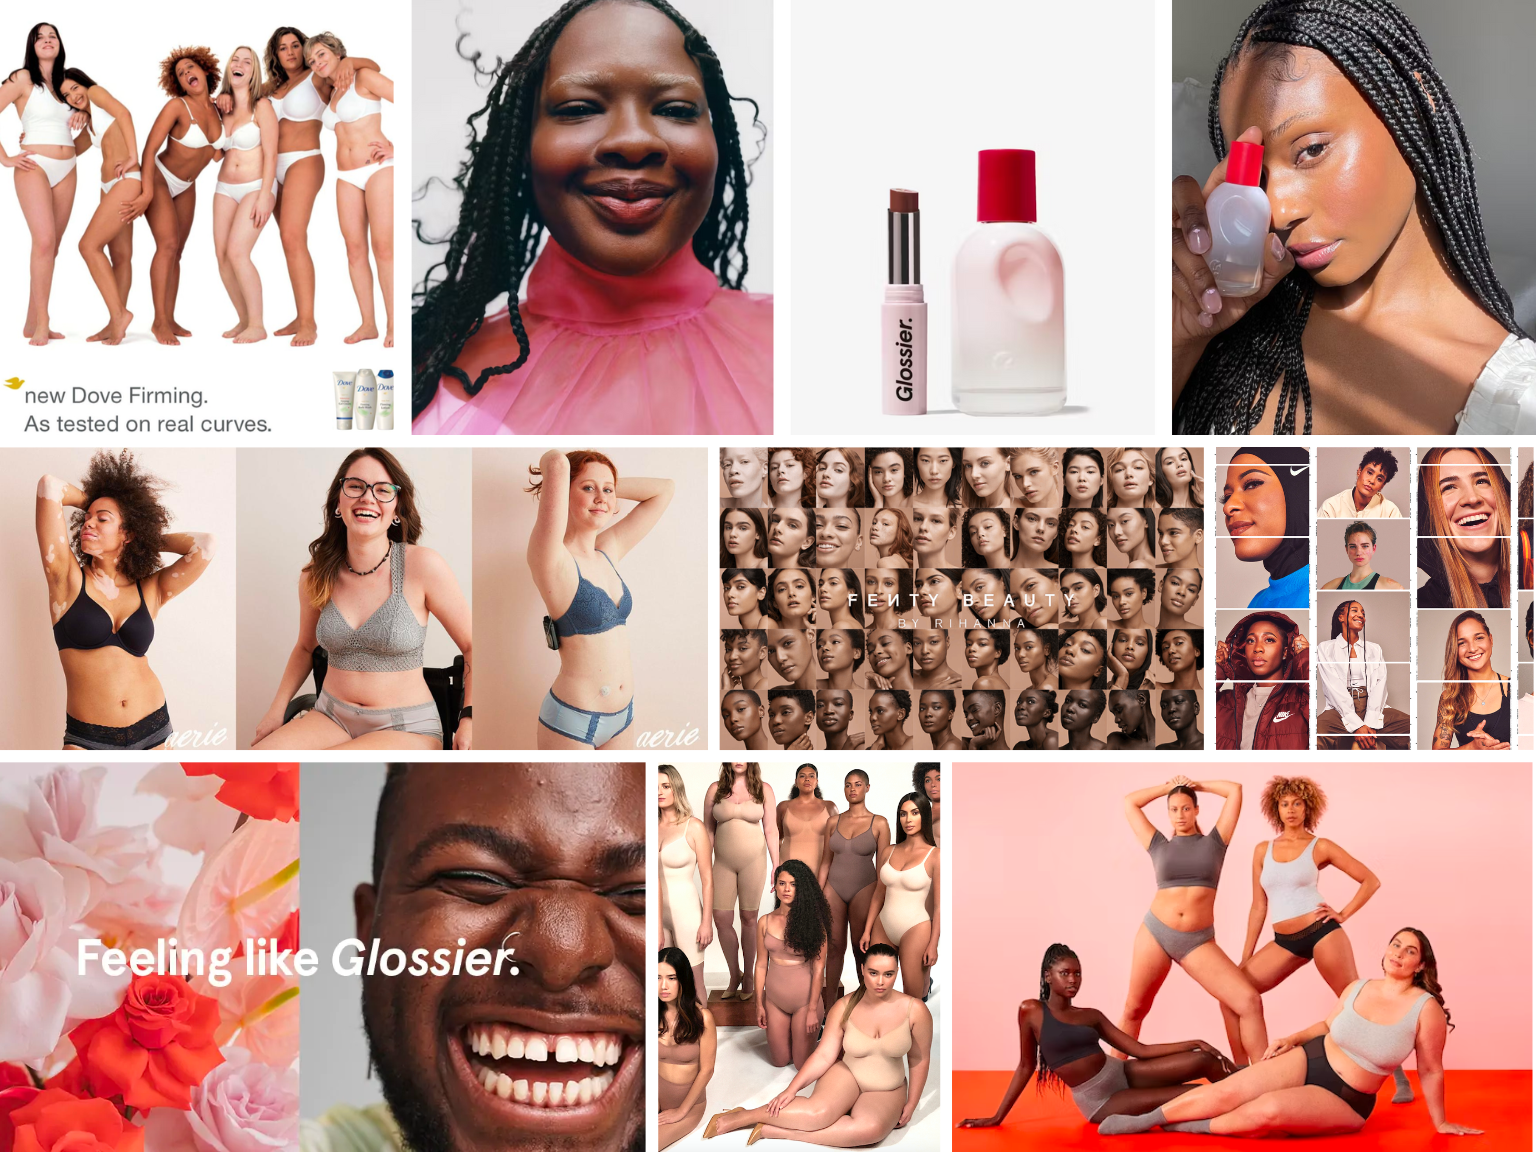 Collage of diverse model casting in e-commerce, featuring a variety of models in inclusive fashion and beauty campaigns